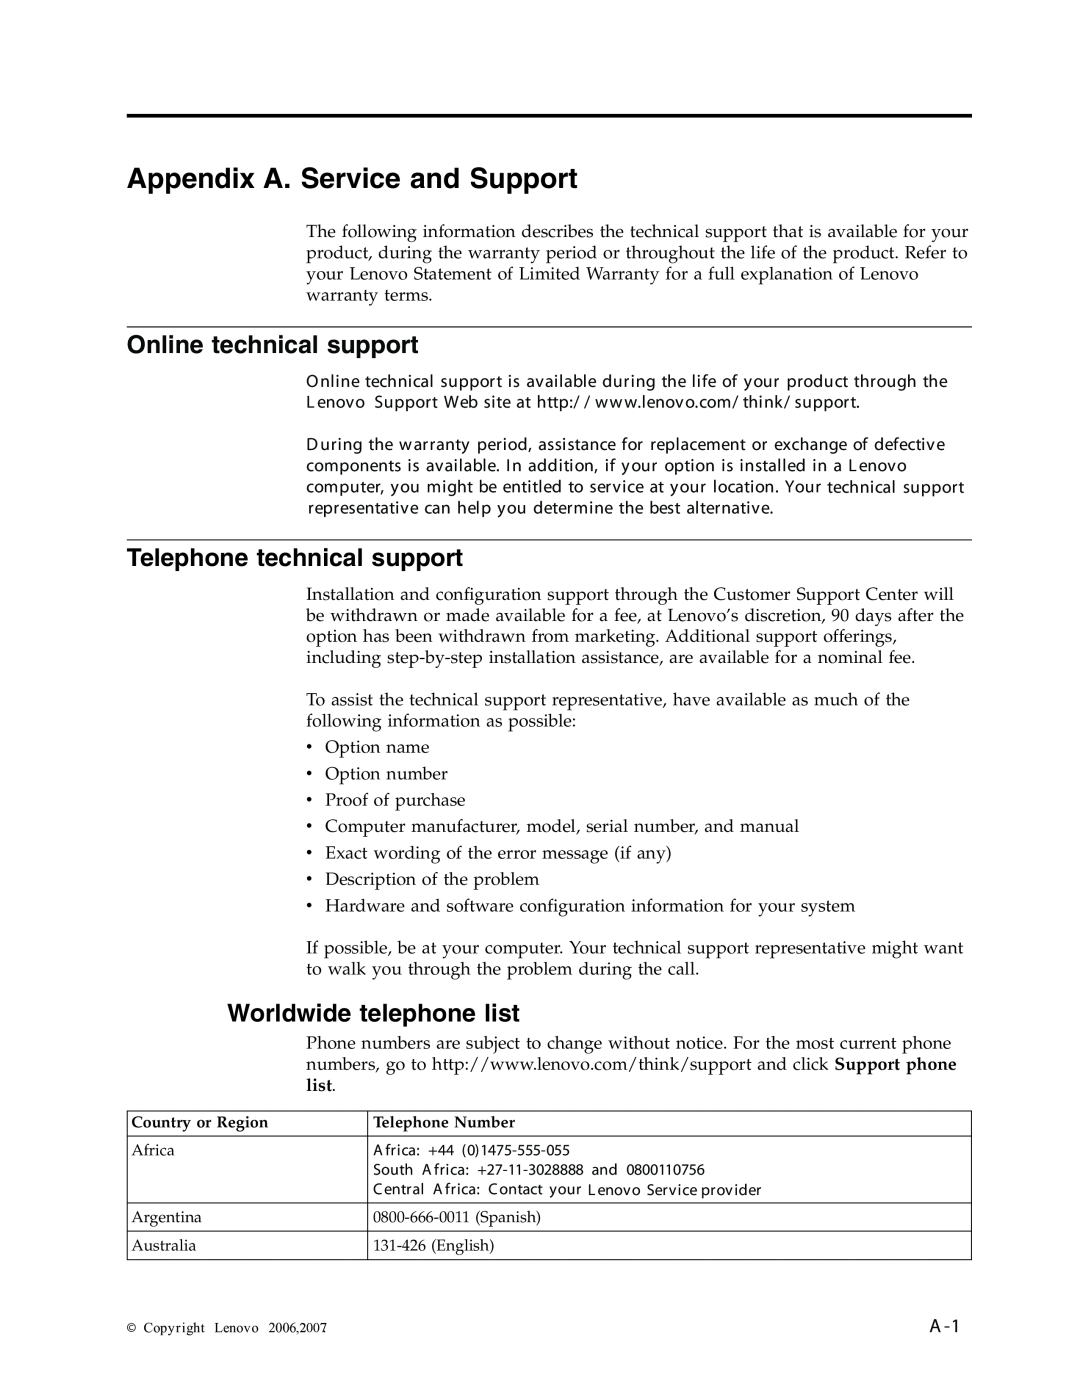 Lenovo L171 manual Appendix A. Service and Support, Online technical support, Telephone technical support 